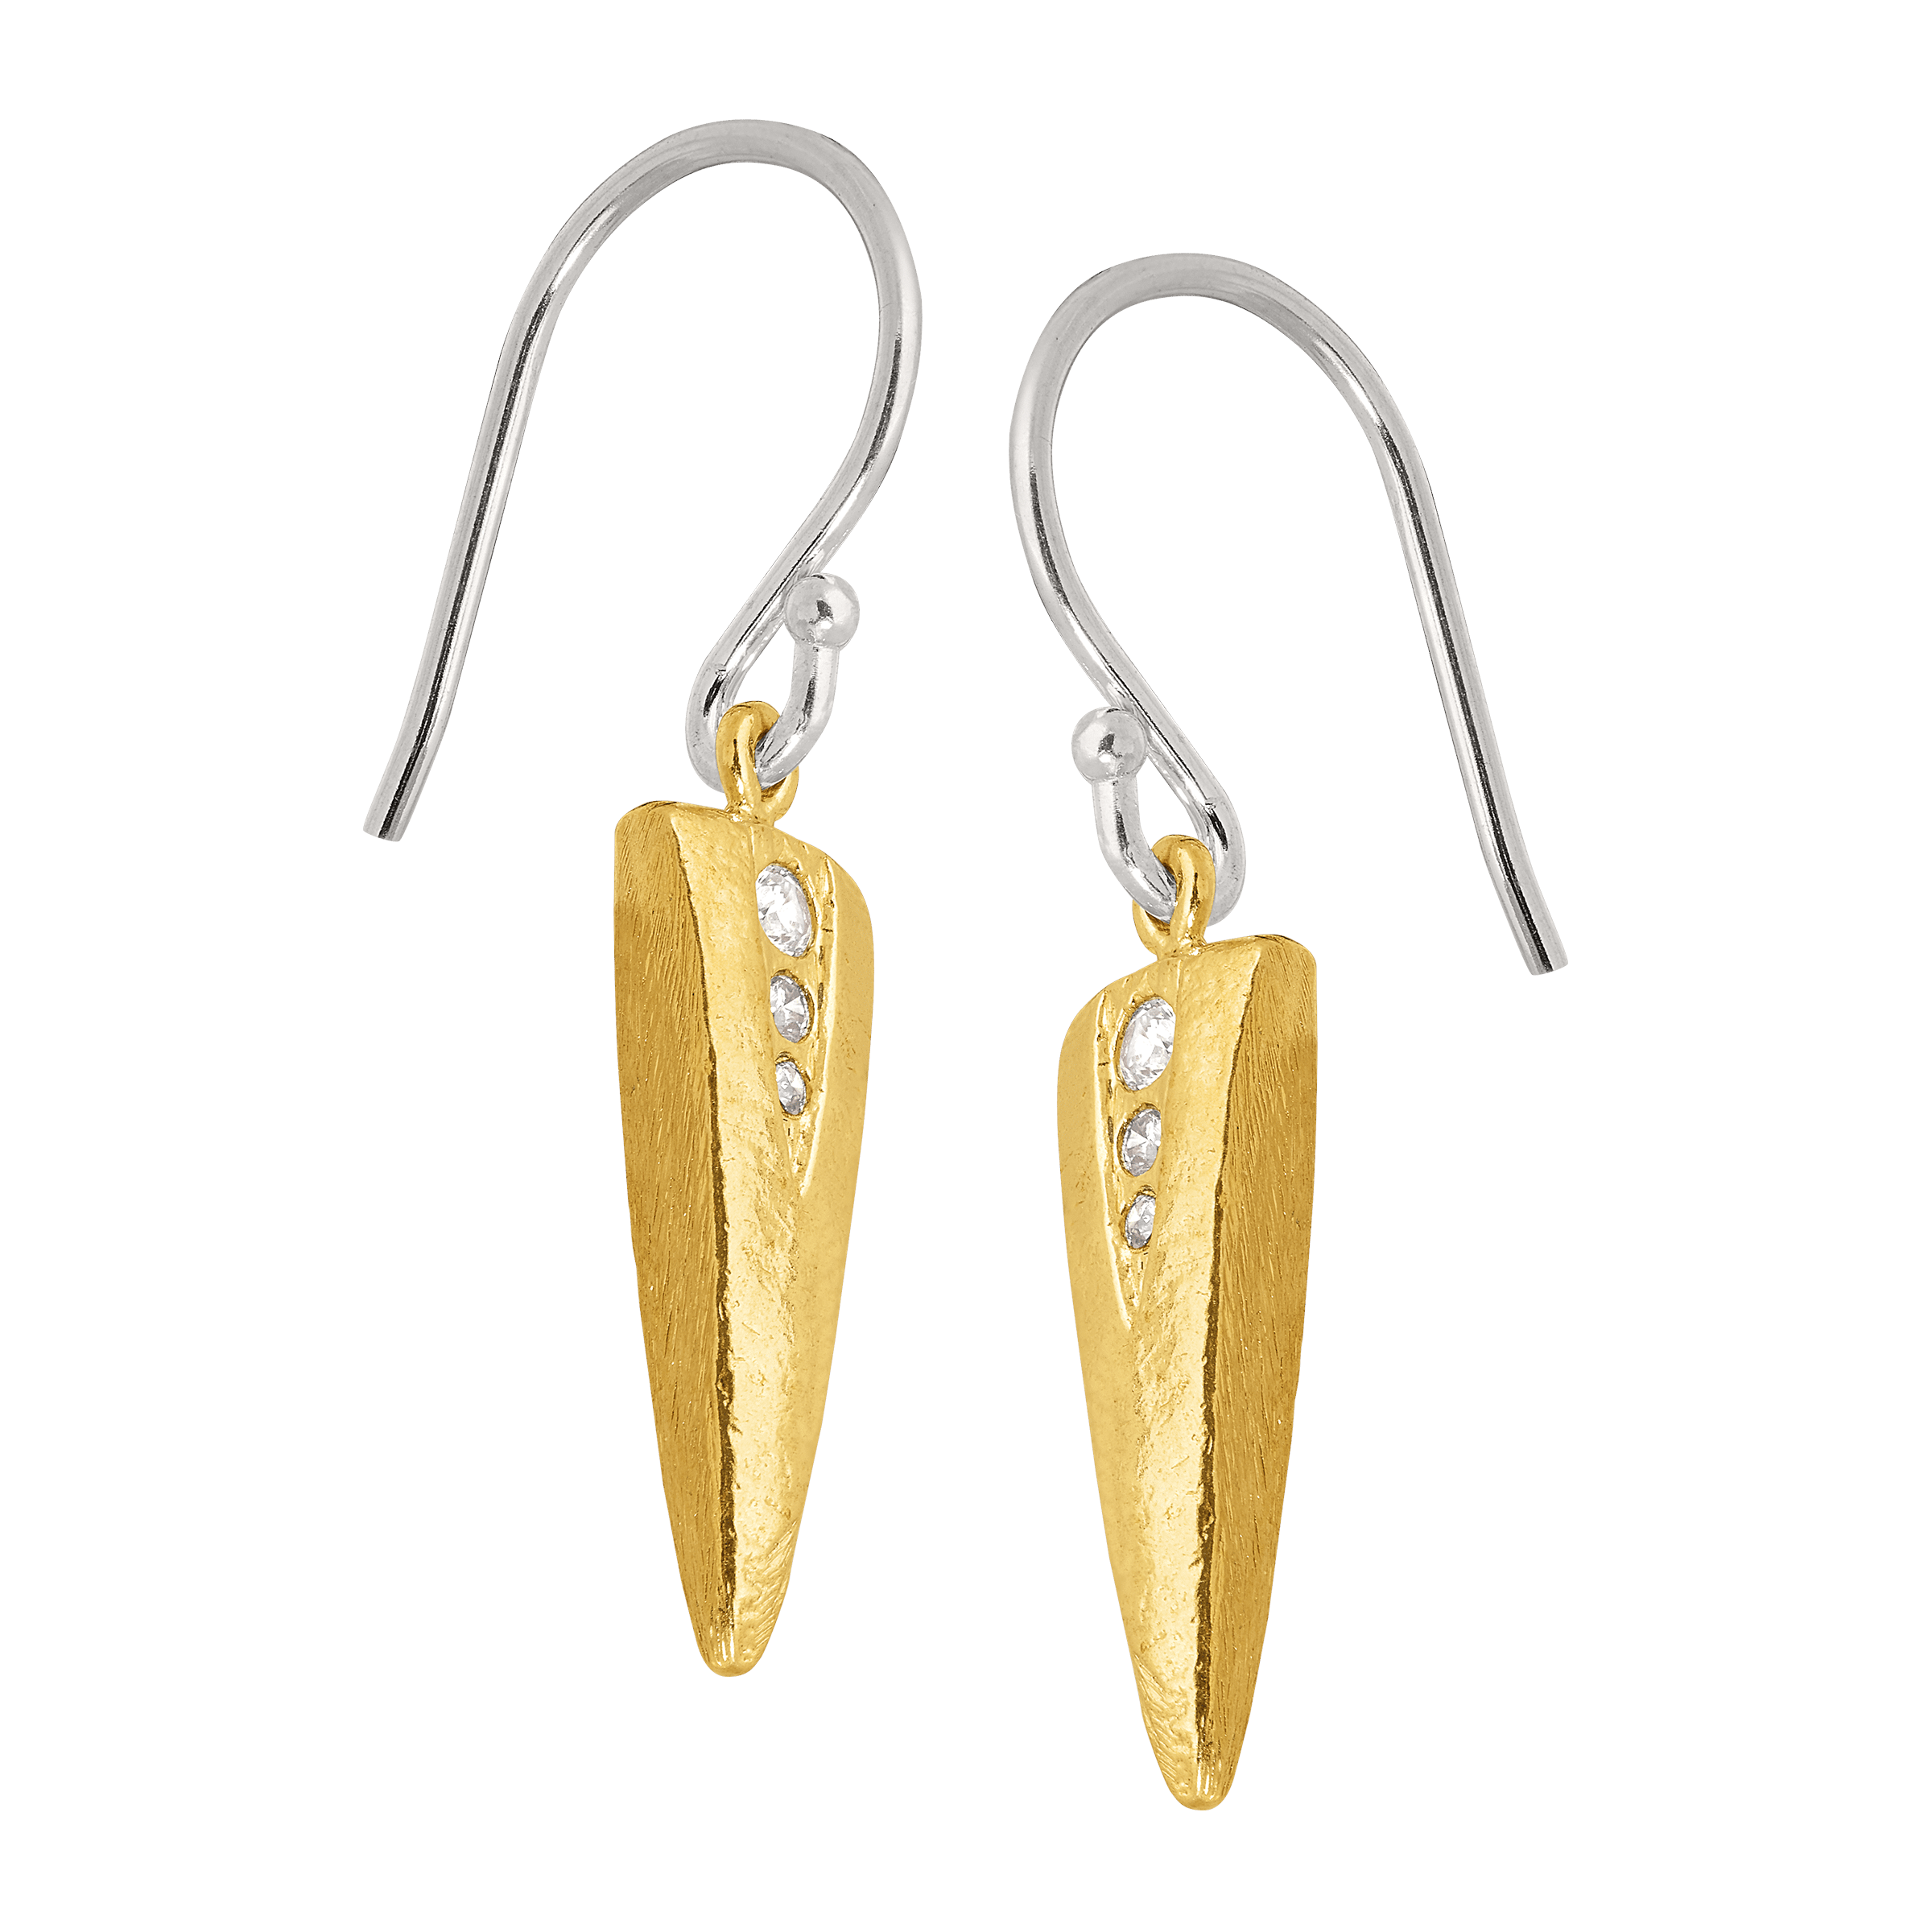 Silpada 'On Point' Triangular Drop Earrings with 5/8 ct Cubic